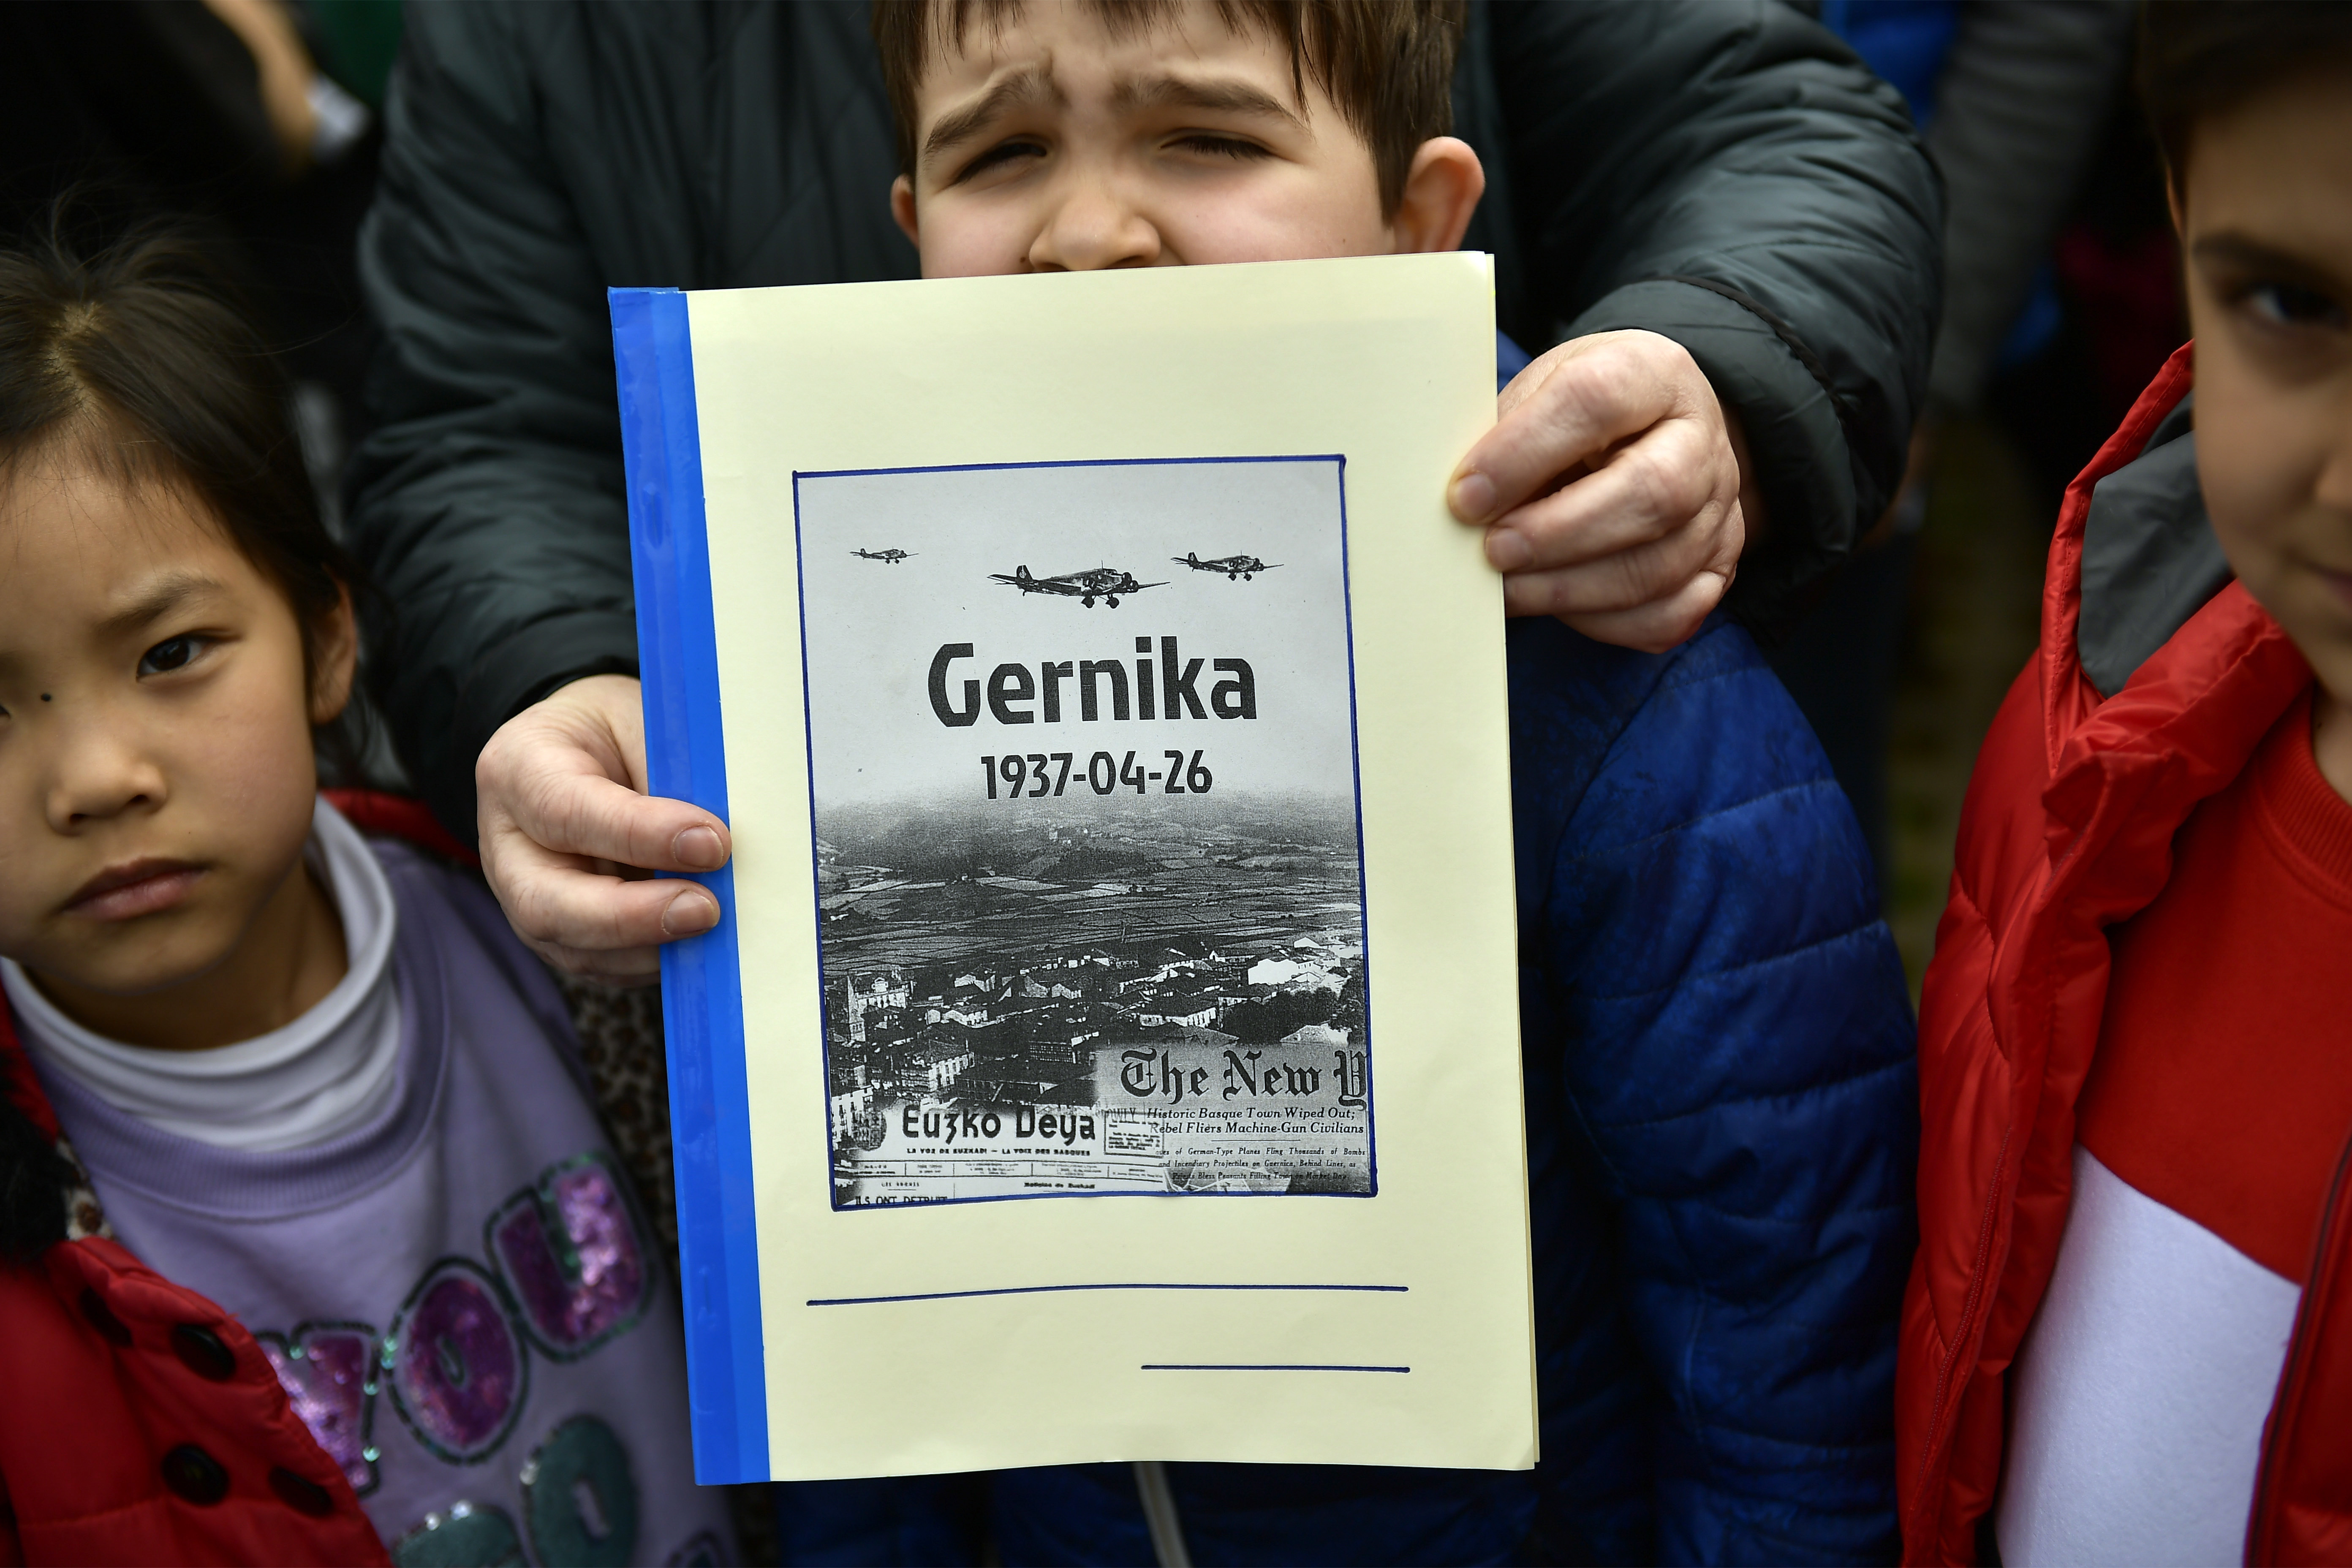 A young boy holds ups a magazine commemorating the 81st anniversary of Guernica and in tribute for all people killed in the Spanish Civil War, in Guernica, northern Spain, Thursday, April 26, 2018. The small town was destroyed in an attack by German bombers and thousands of Basque citizens died on this day in 1937. The carnage has ever since stood as a symbol of man's cruelty to his fellow man, immortalized in Pablo Picasso's immense and powerful painting, one of the most iconic works of art of the 20th century. (AP Photo/Alvaro Barrientos)